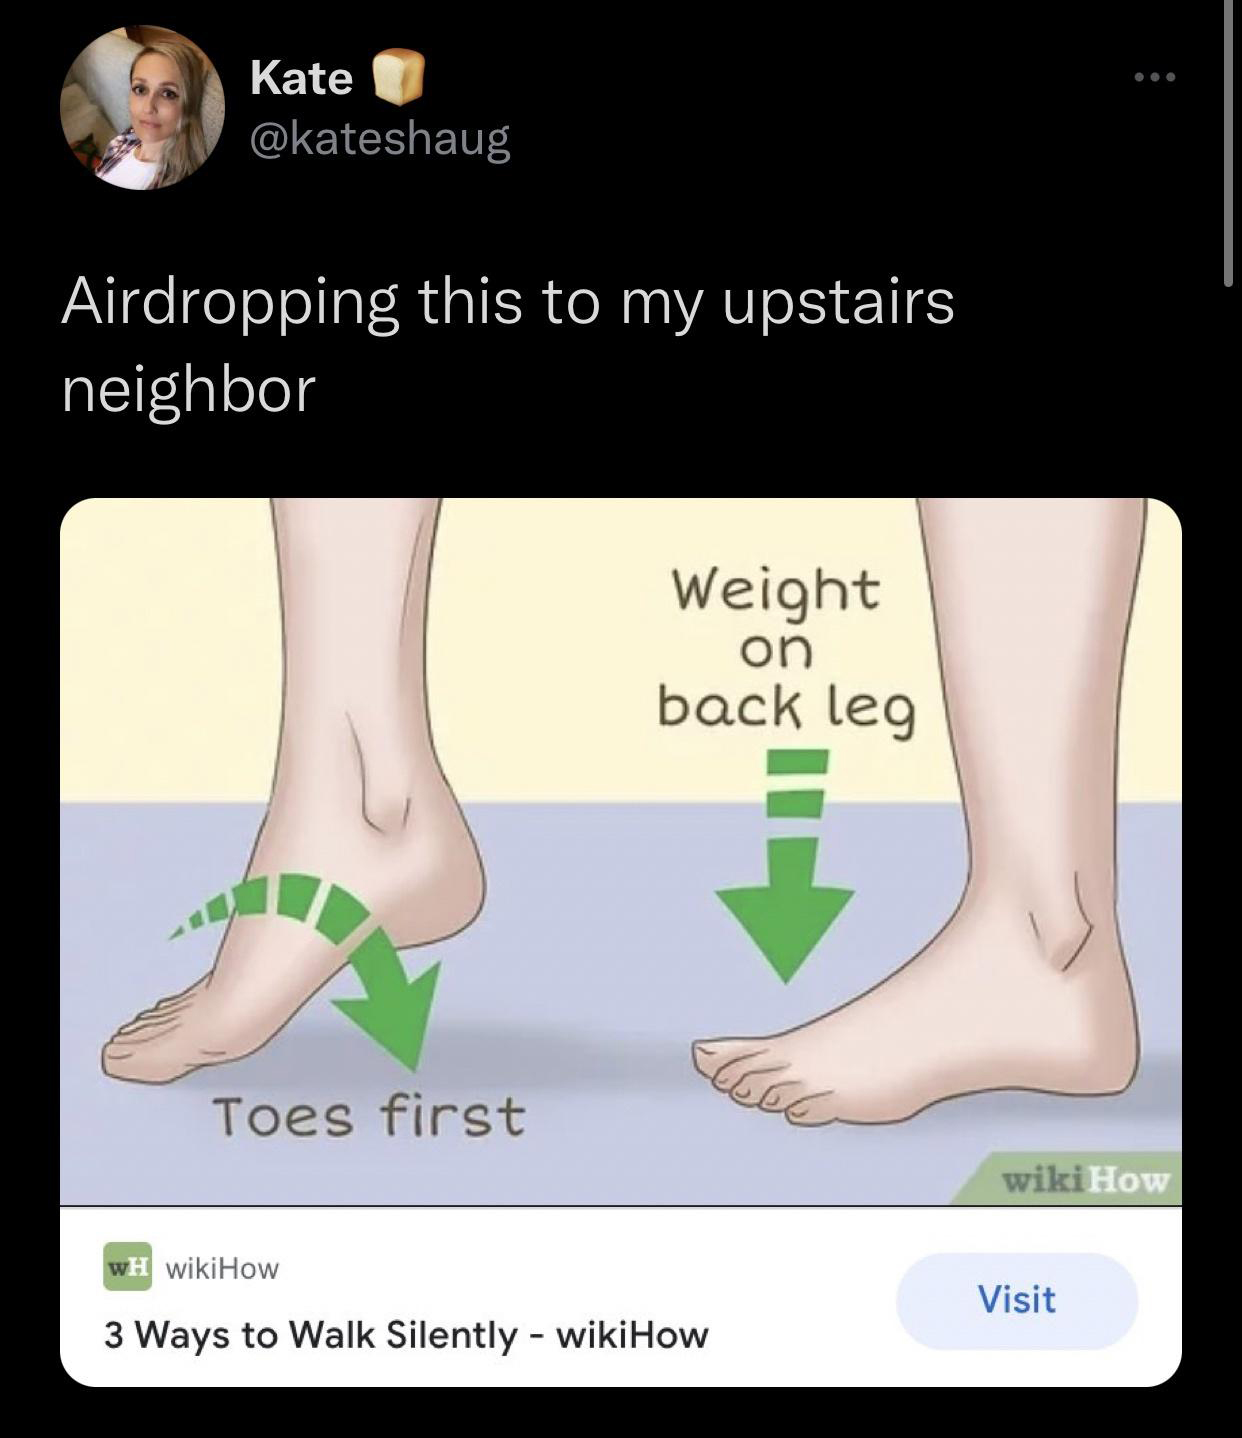 twitter memes - human leg - Kate Airdropping this to my upstairs neighbor Weight on back leg Toes first wikiHow Wh wikiHow Visit 3 Ways to Walk Silently wikiHow